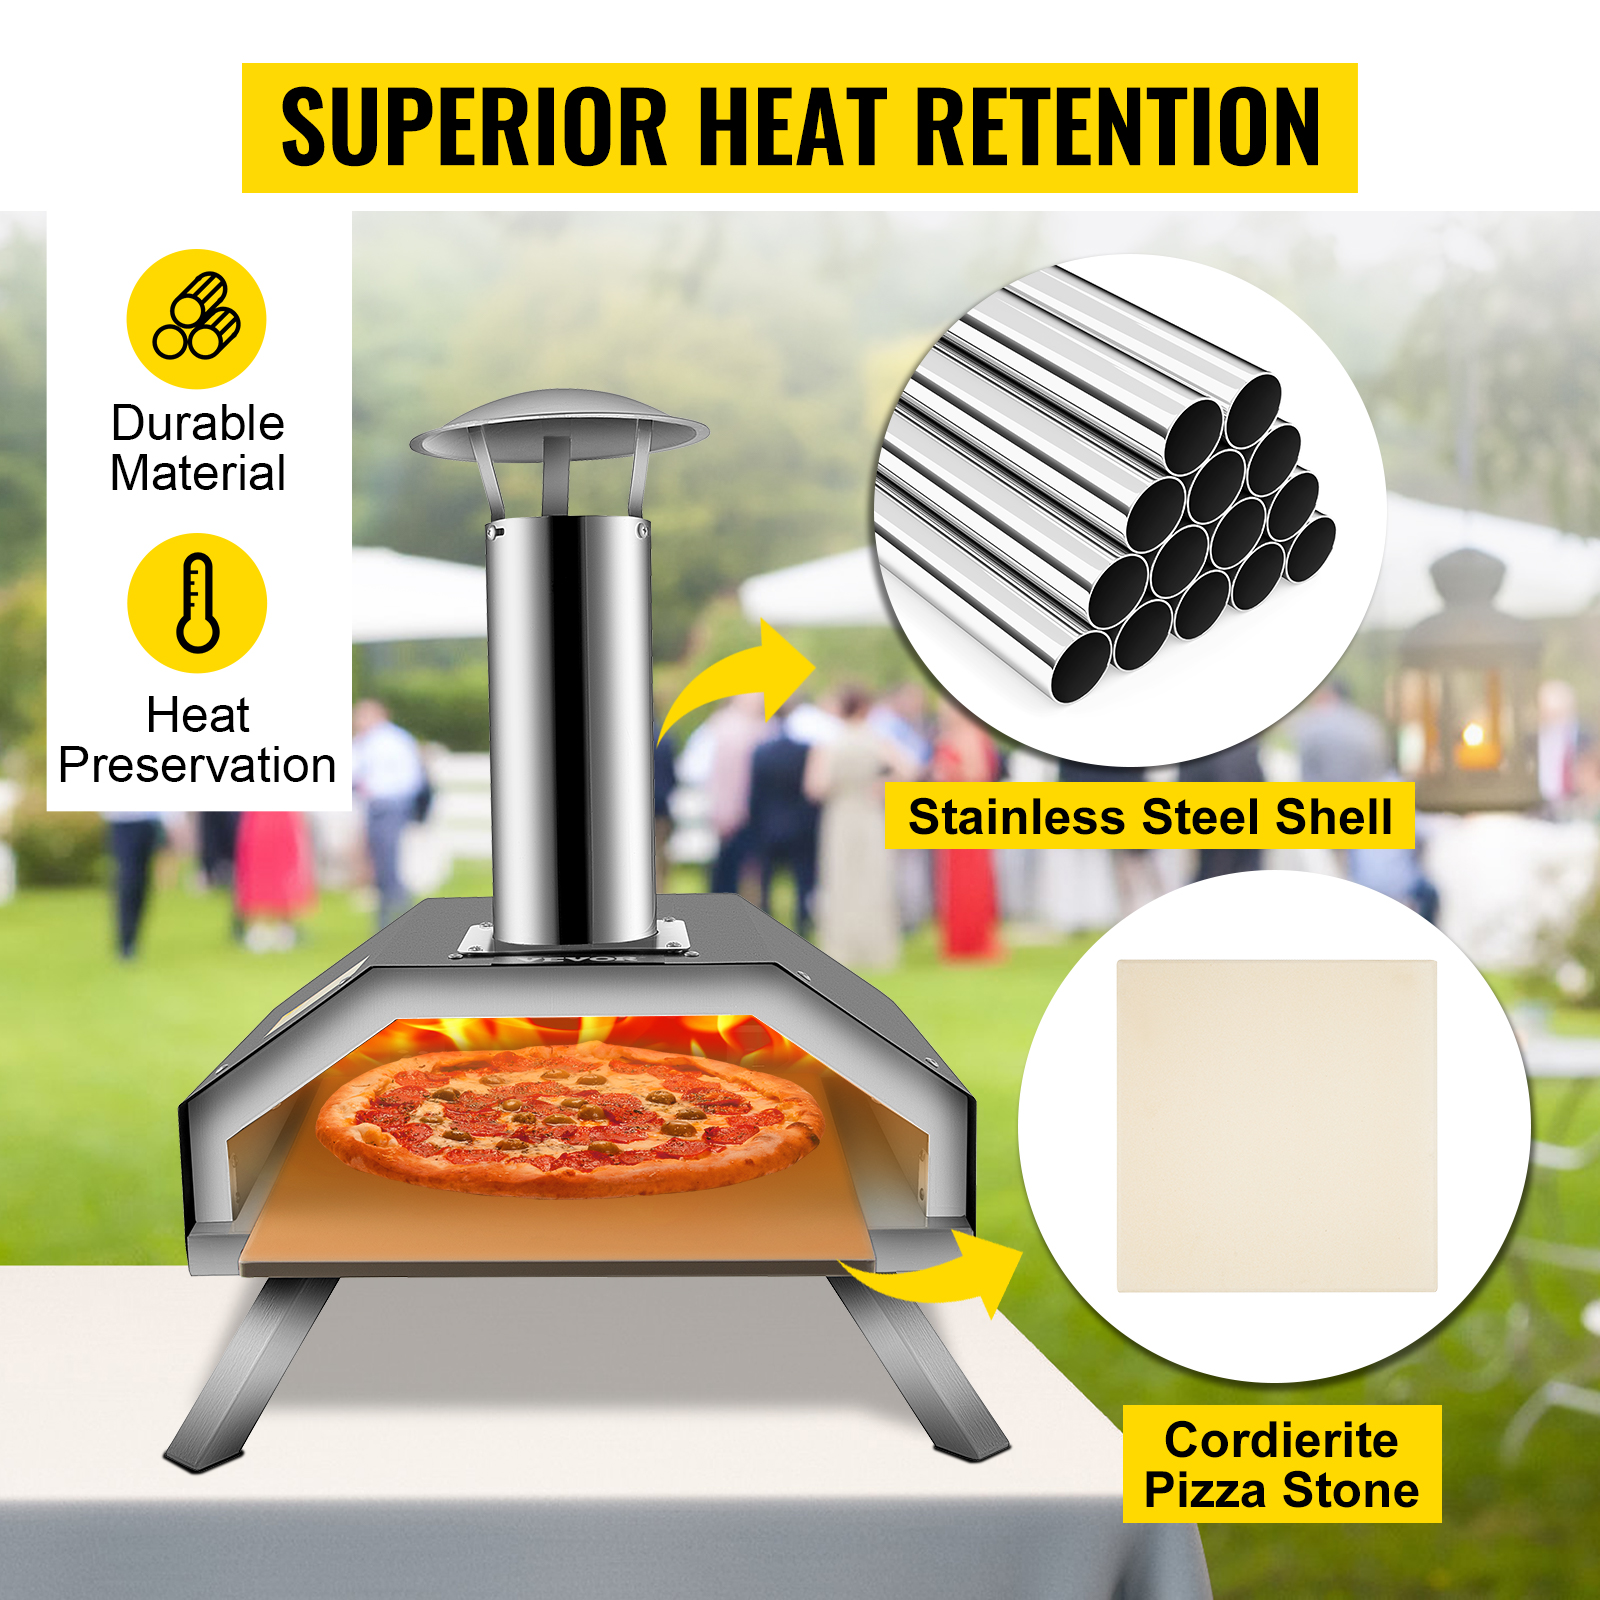 Portable Pizza Oven Good Insulation Effect 304 Stainless Steel Foldable Feet Complete Accessories Bag for Outdoor Cooking